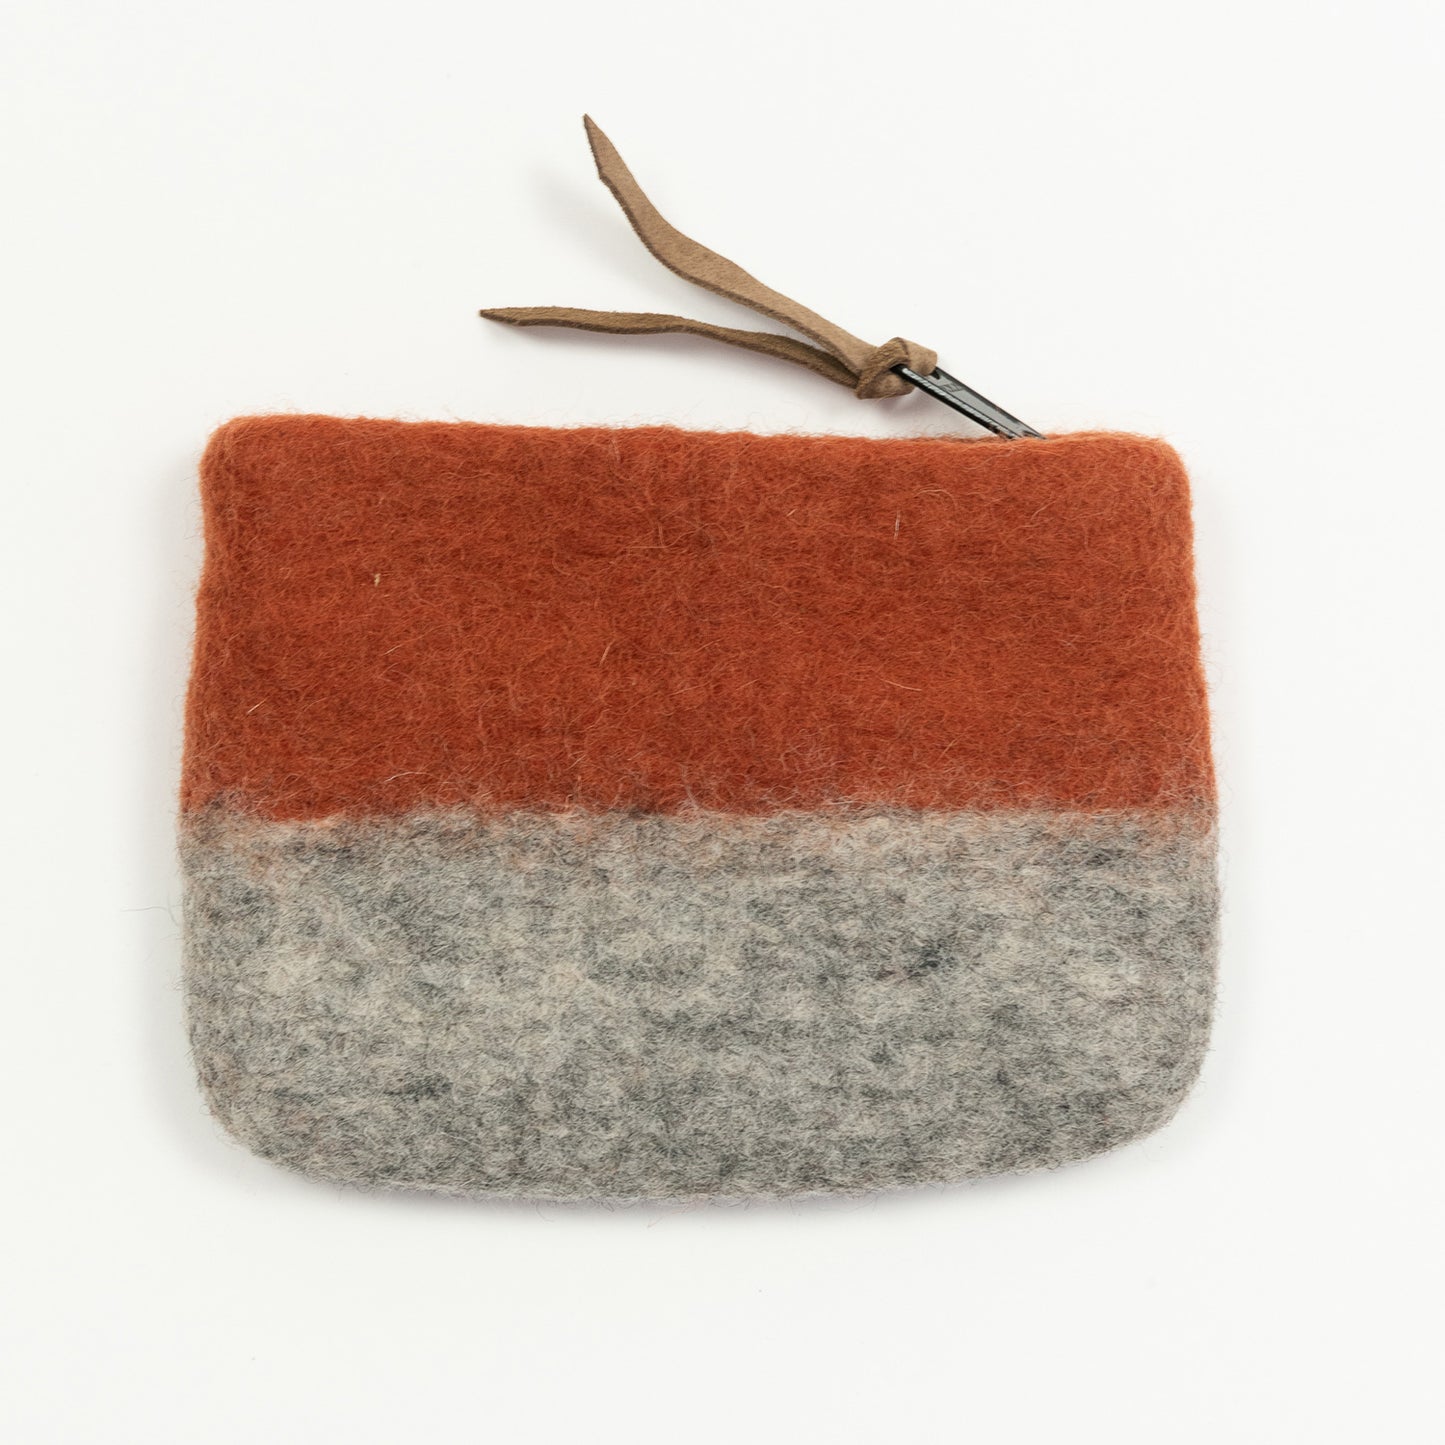 An orange and grey felt purse with brown zip pull pictured on a white background.